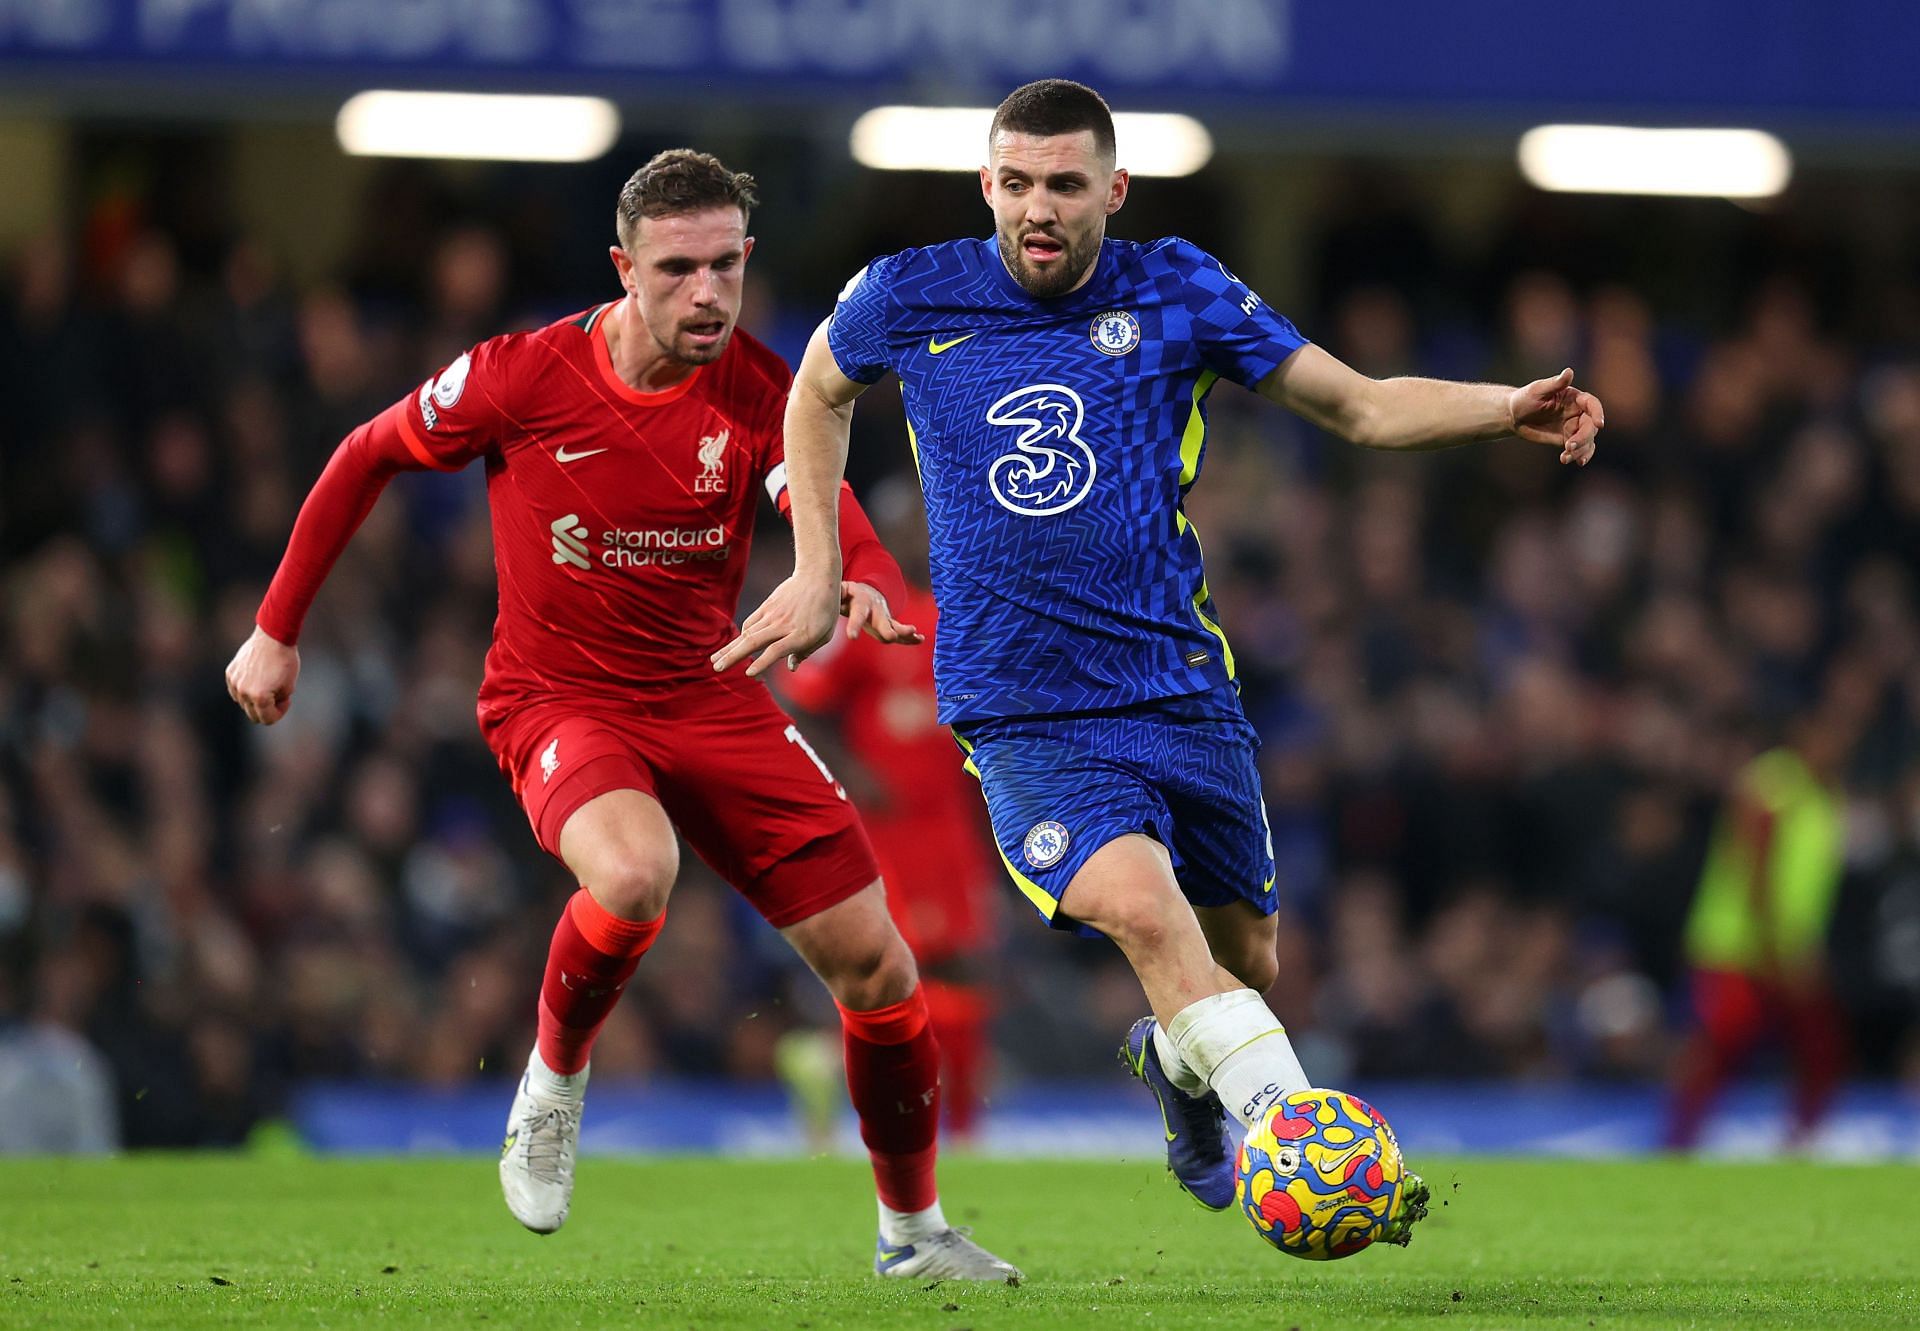 Chelsea and Liverpool played out an entertaining 2-2 draw in the Premier League on Sunday.